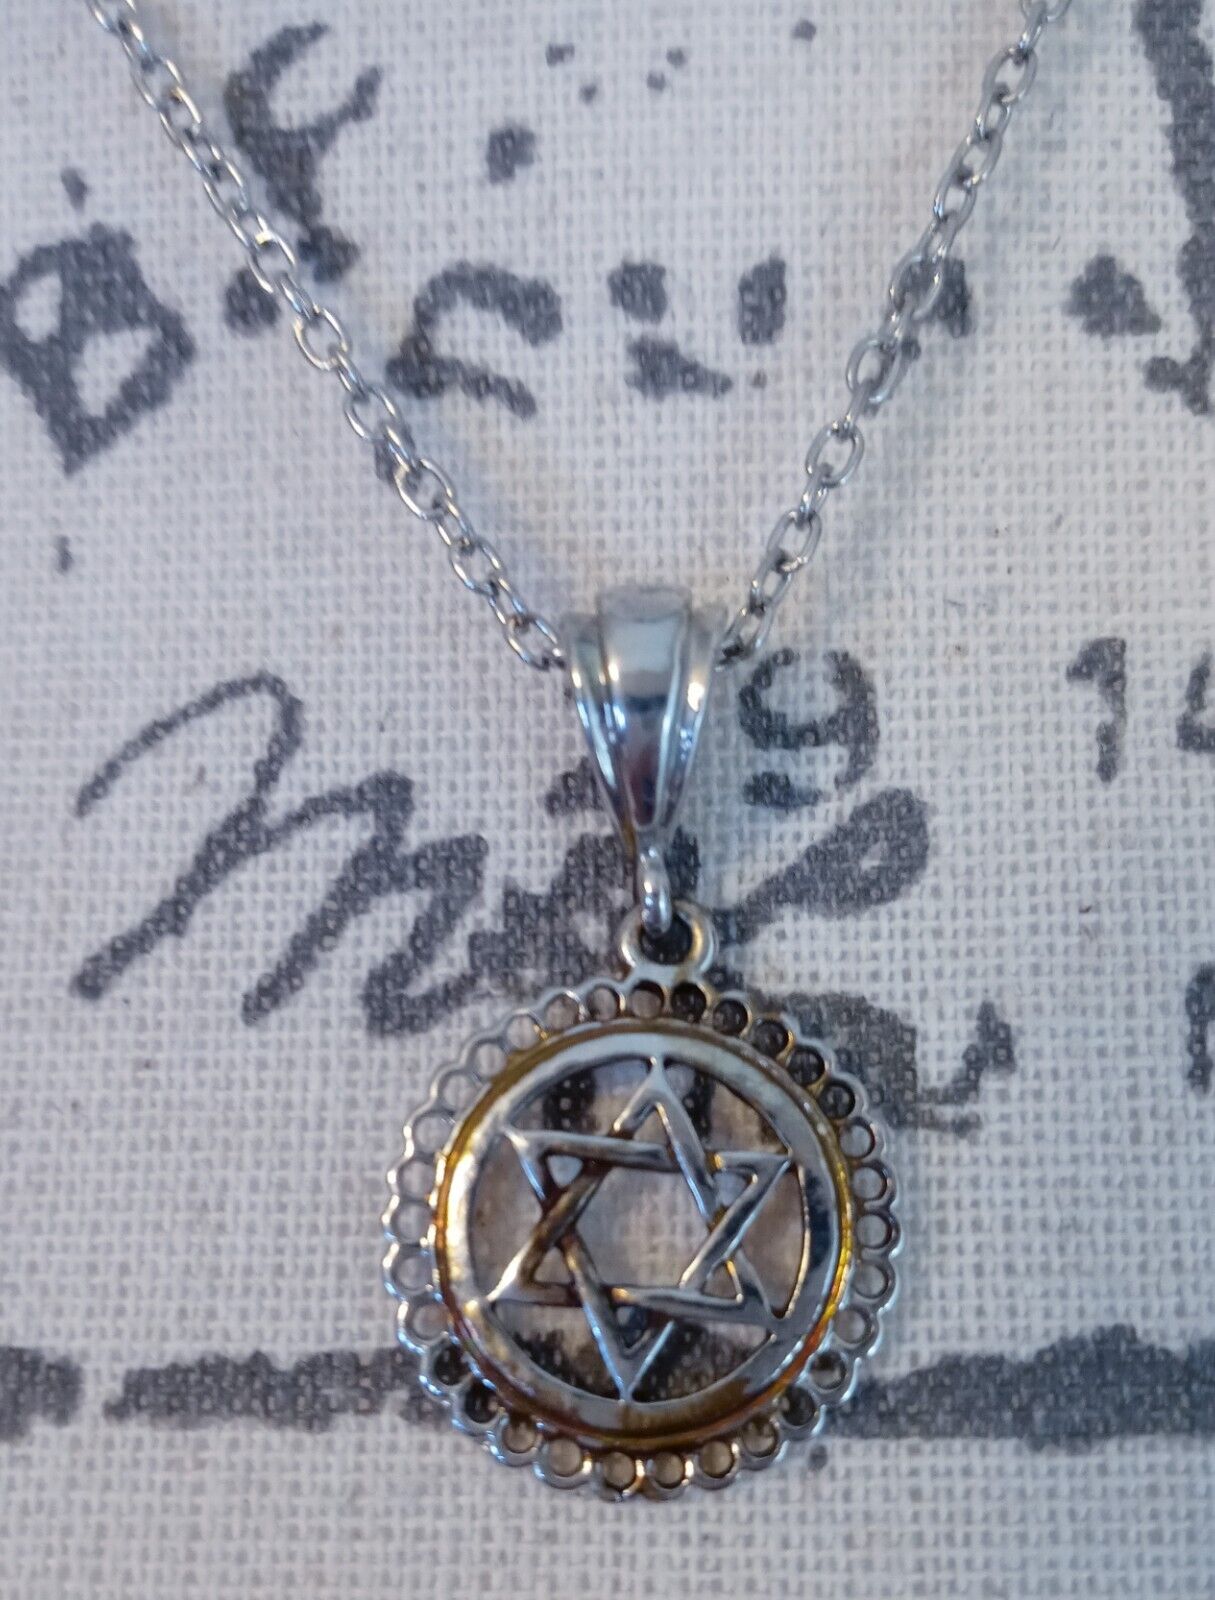 Vintage Sterling Silver Plated Jewish Star Inside Circle Pendant Necklace